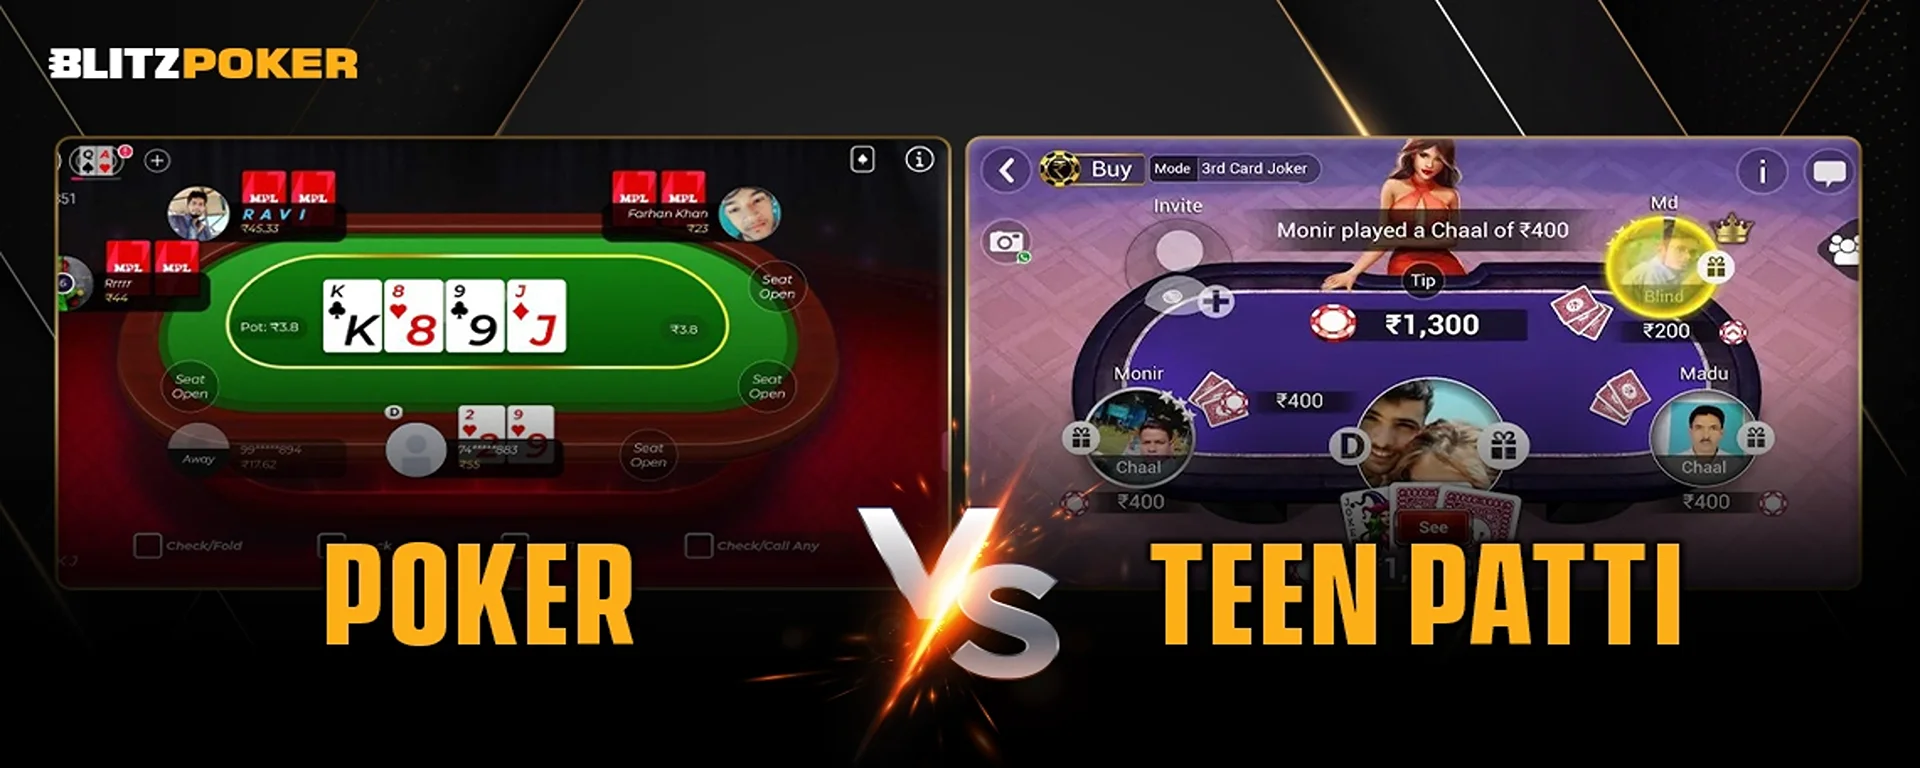 Difference Between Poker and 3 Patti : Poker Vs Teen Patti